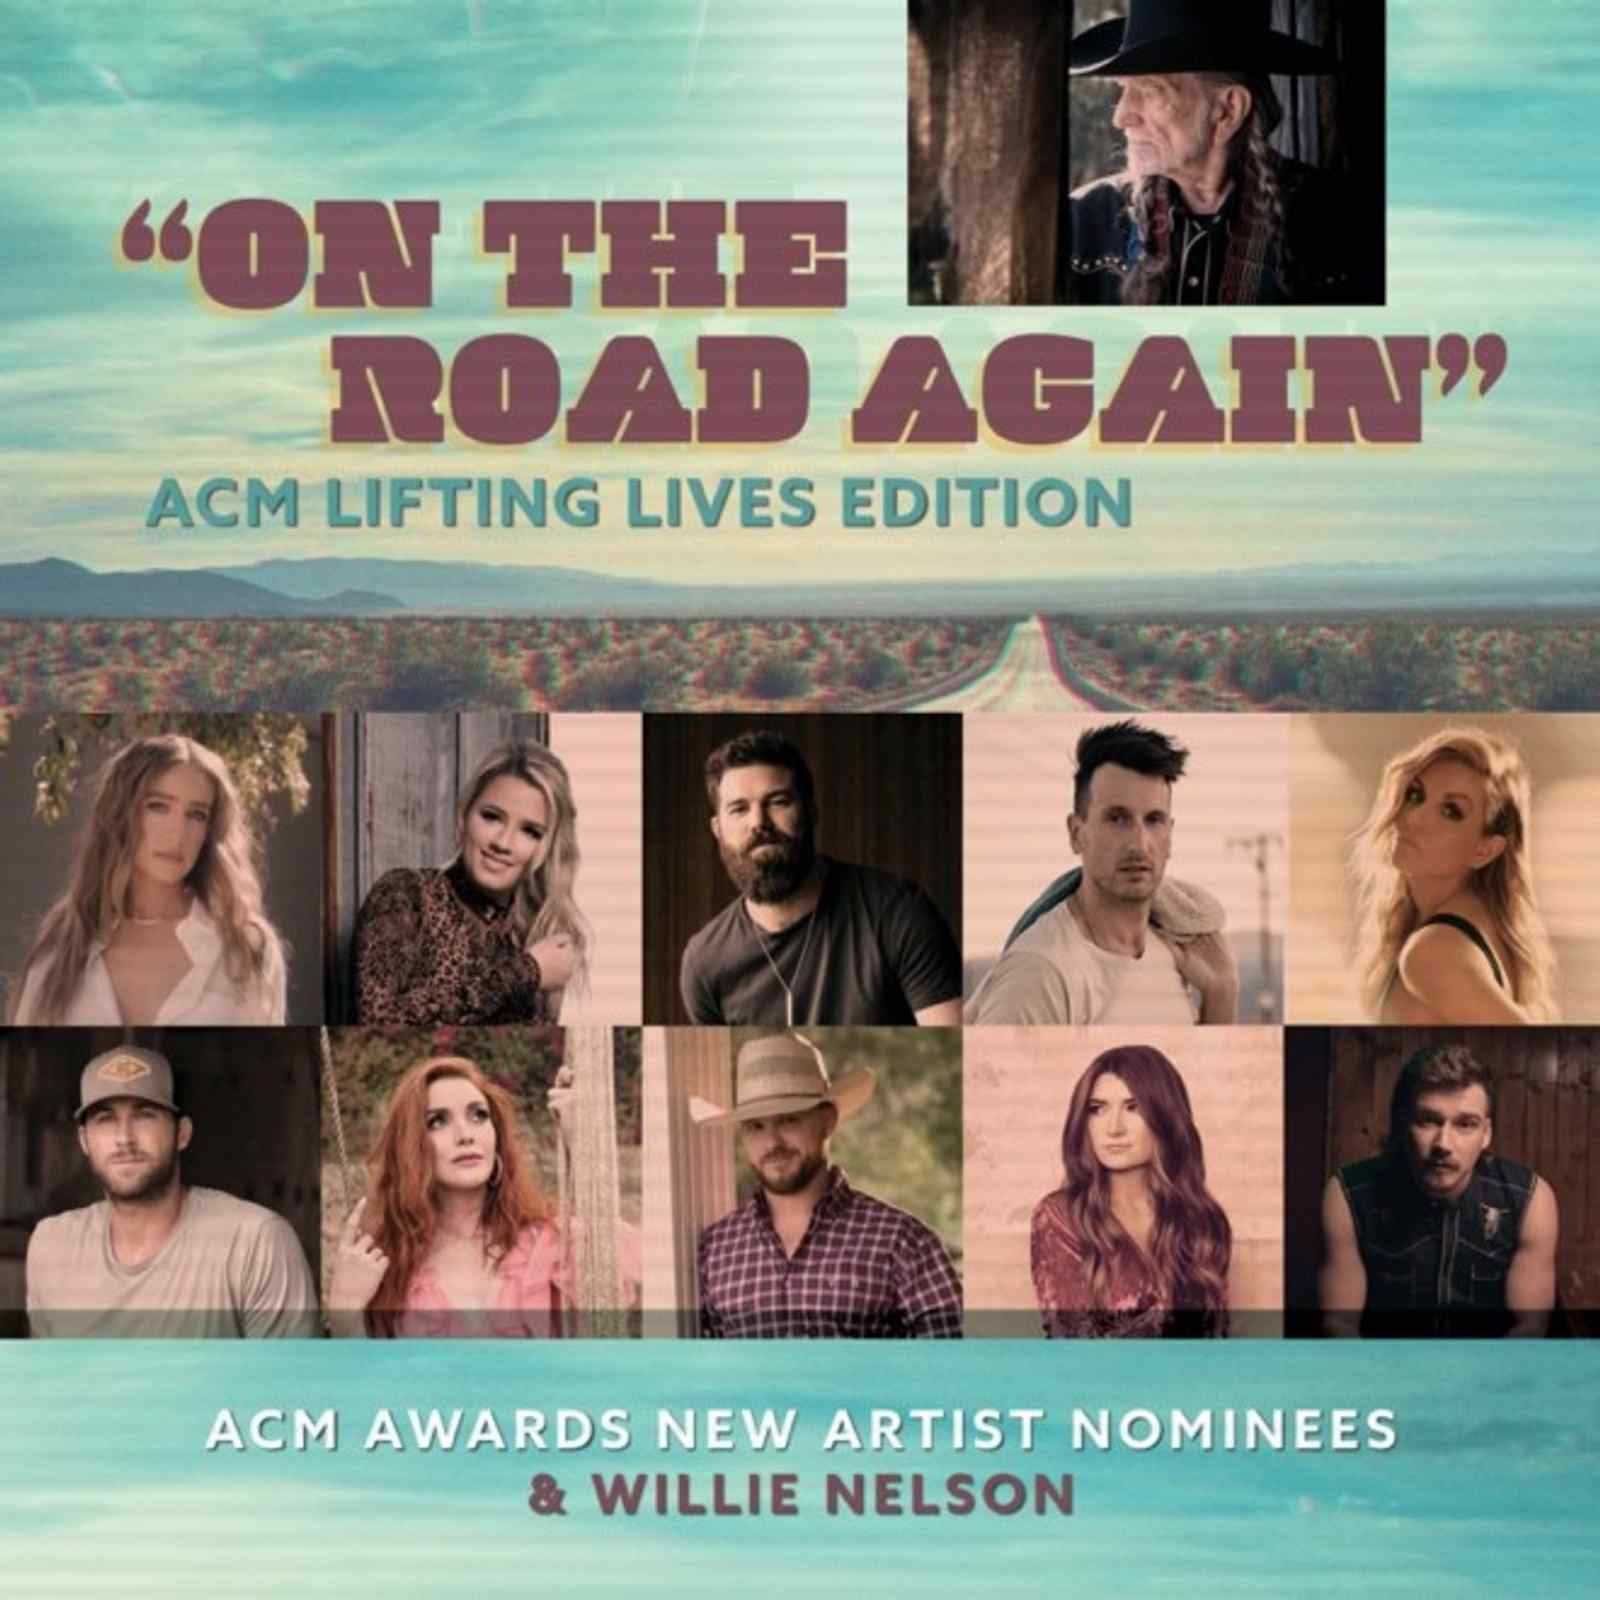 ACADEMY OF COUNTRY MUSIC® TO RELEASE "﻿ON THE ROAD AGAIN (ACM LIFTING LIVES® EDITION)” THIS THURSDAY, AUGUST 13